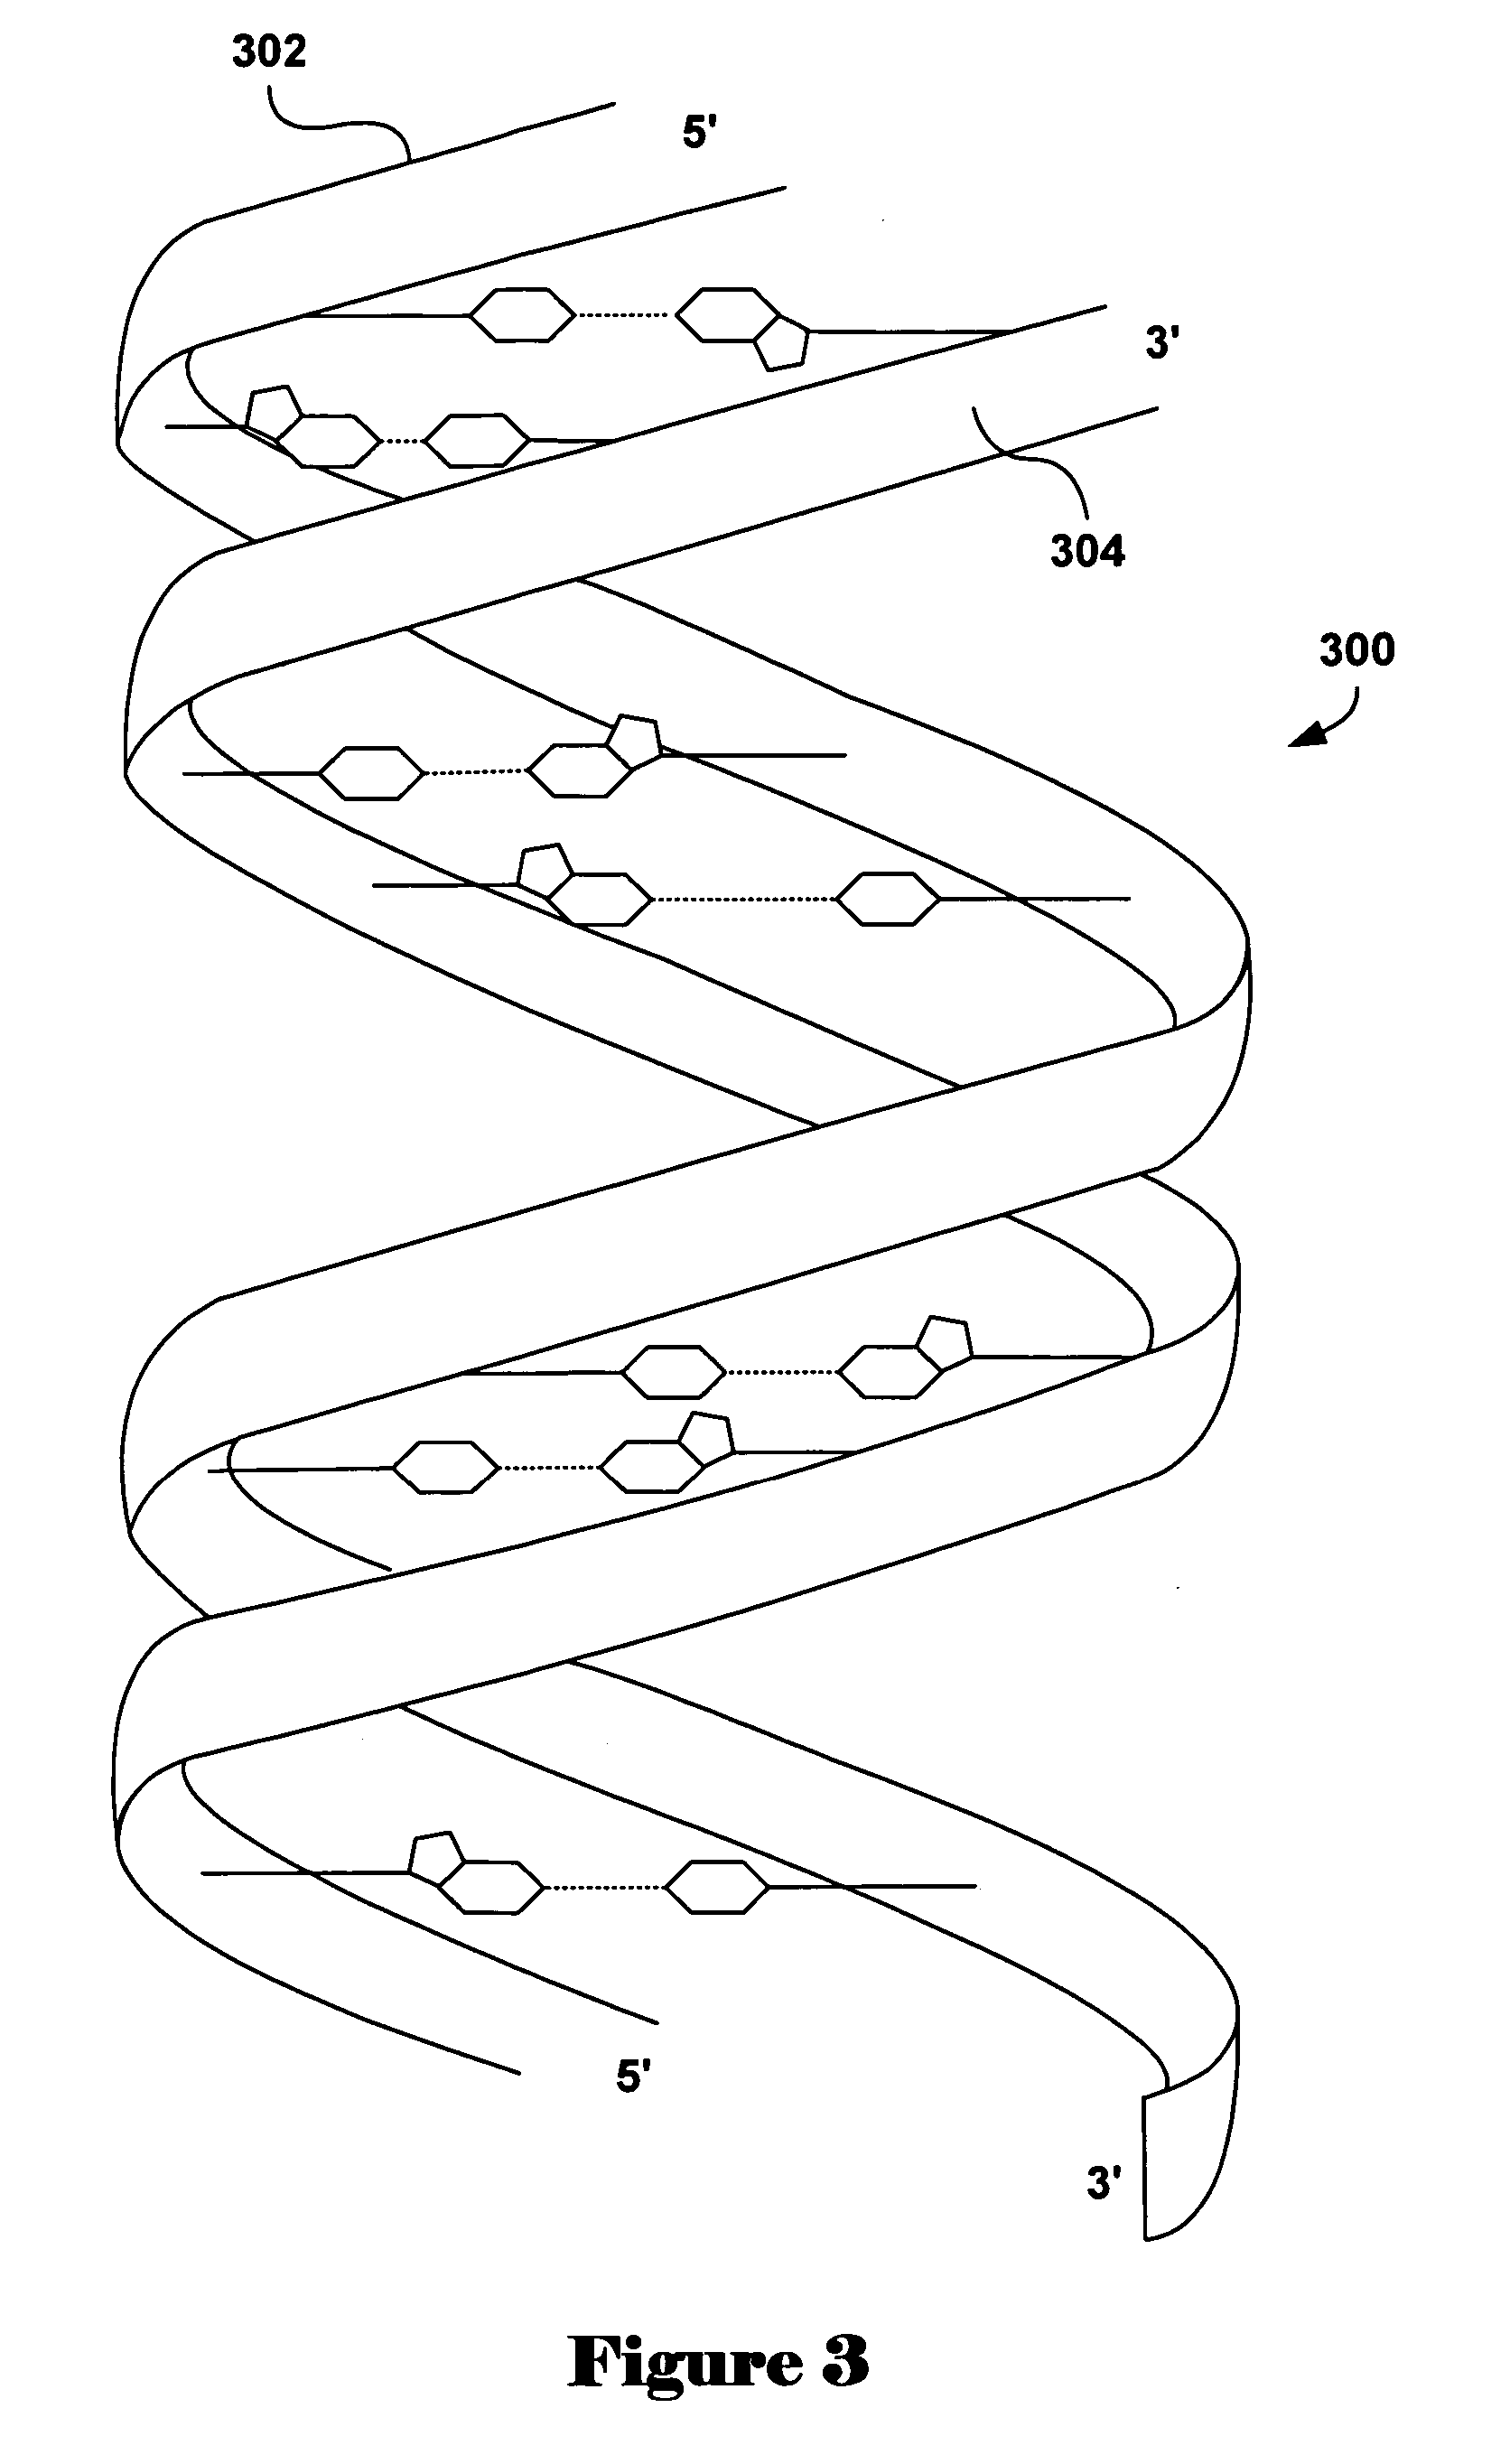 Method and system for determining feature-coordinate grid or subgrids of microarray images